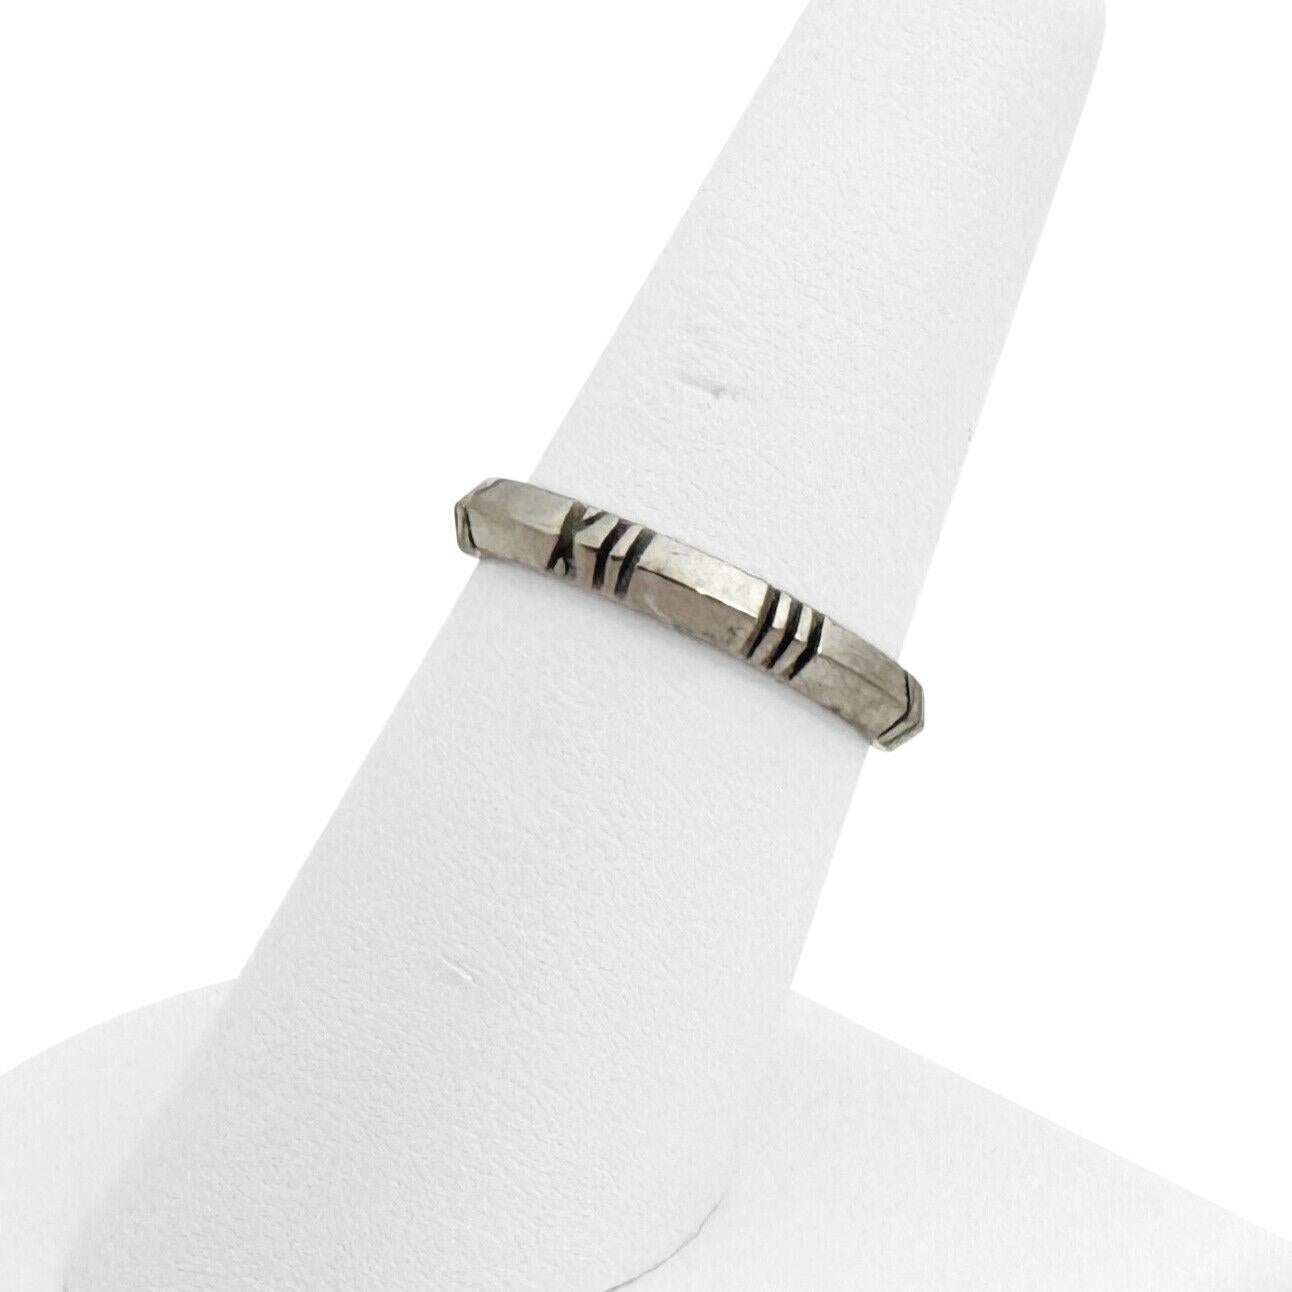 Tiffany & Co. 18k White Gold Vintage Ladies 3mm Atlas Band Ring Size 6

Condition:  Very Good Condition
Metal:  18k Gold (Marked, and Professionally Tested)
Weight:  4.3g
Width:  3mm
Size:  6
Markings:  